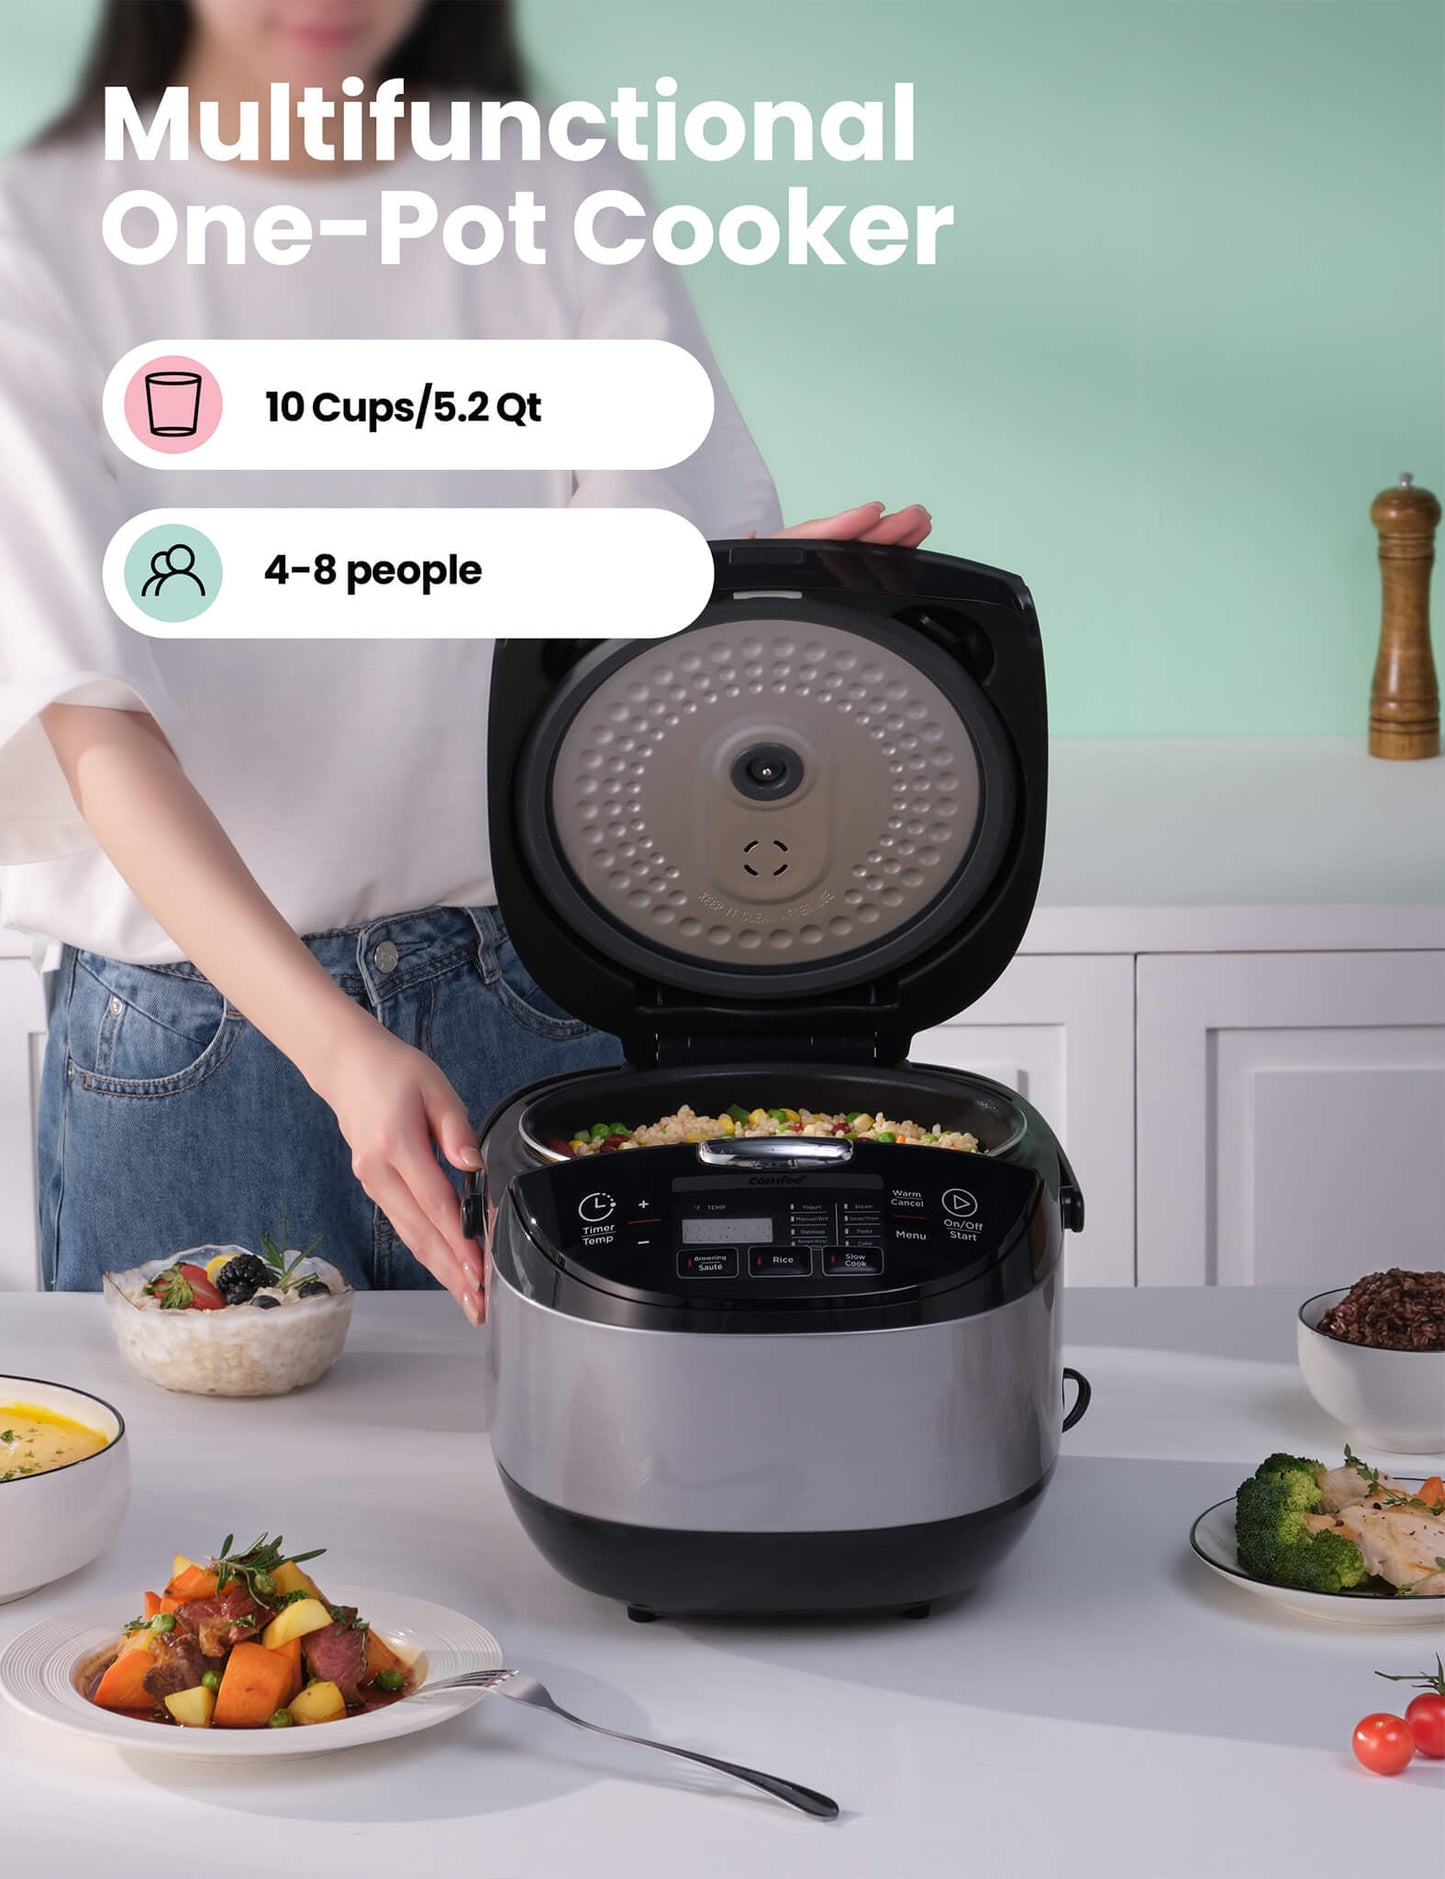 A woman is opening the lid of the rice cooker